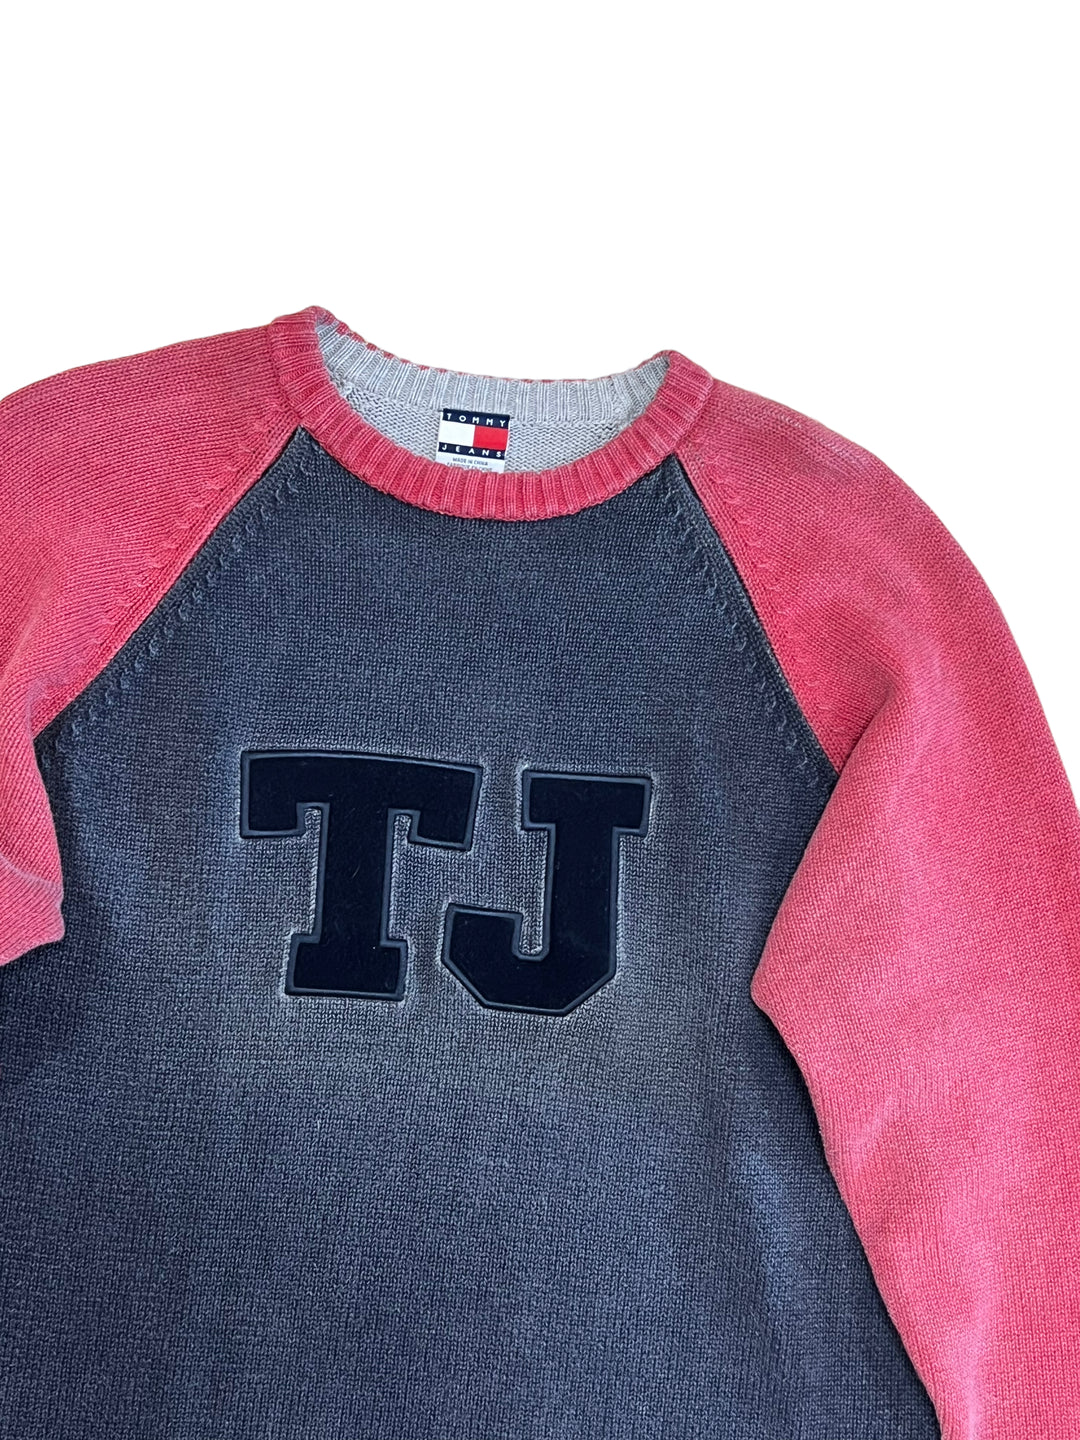 Tommy Jeans Sweater Men’s Oversized Small